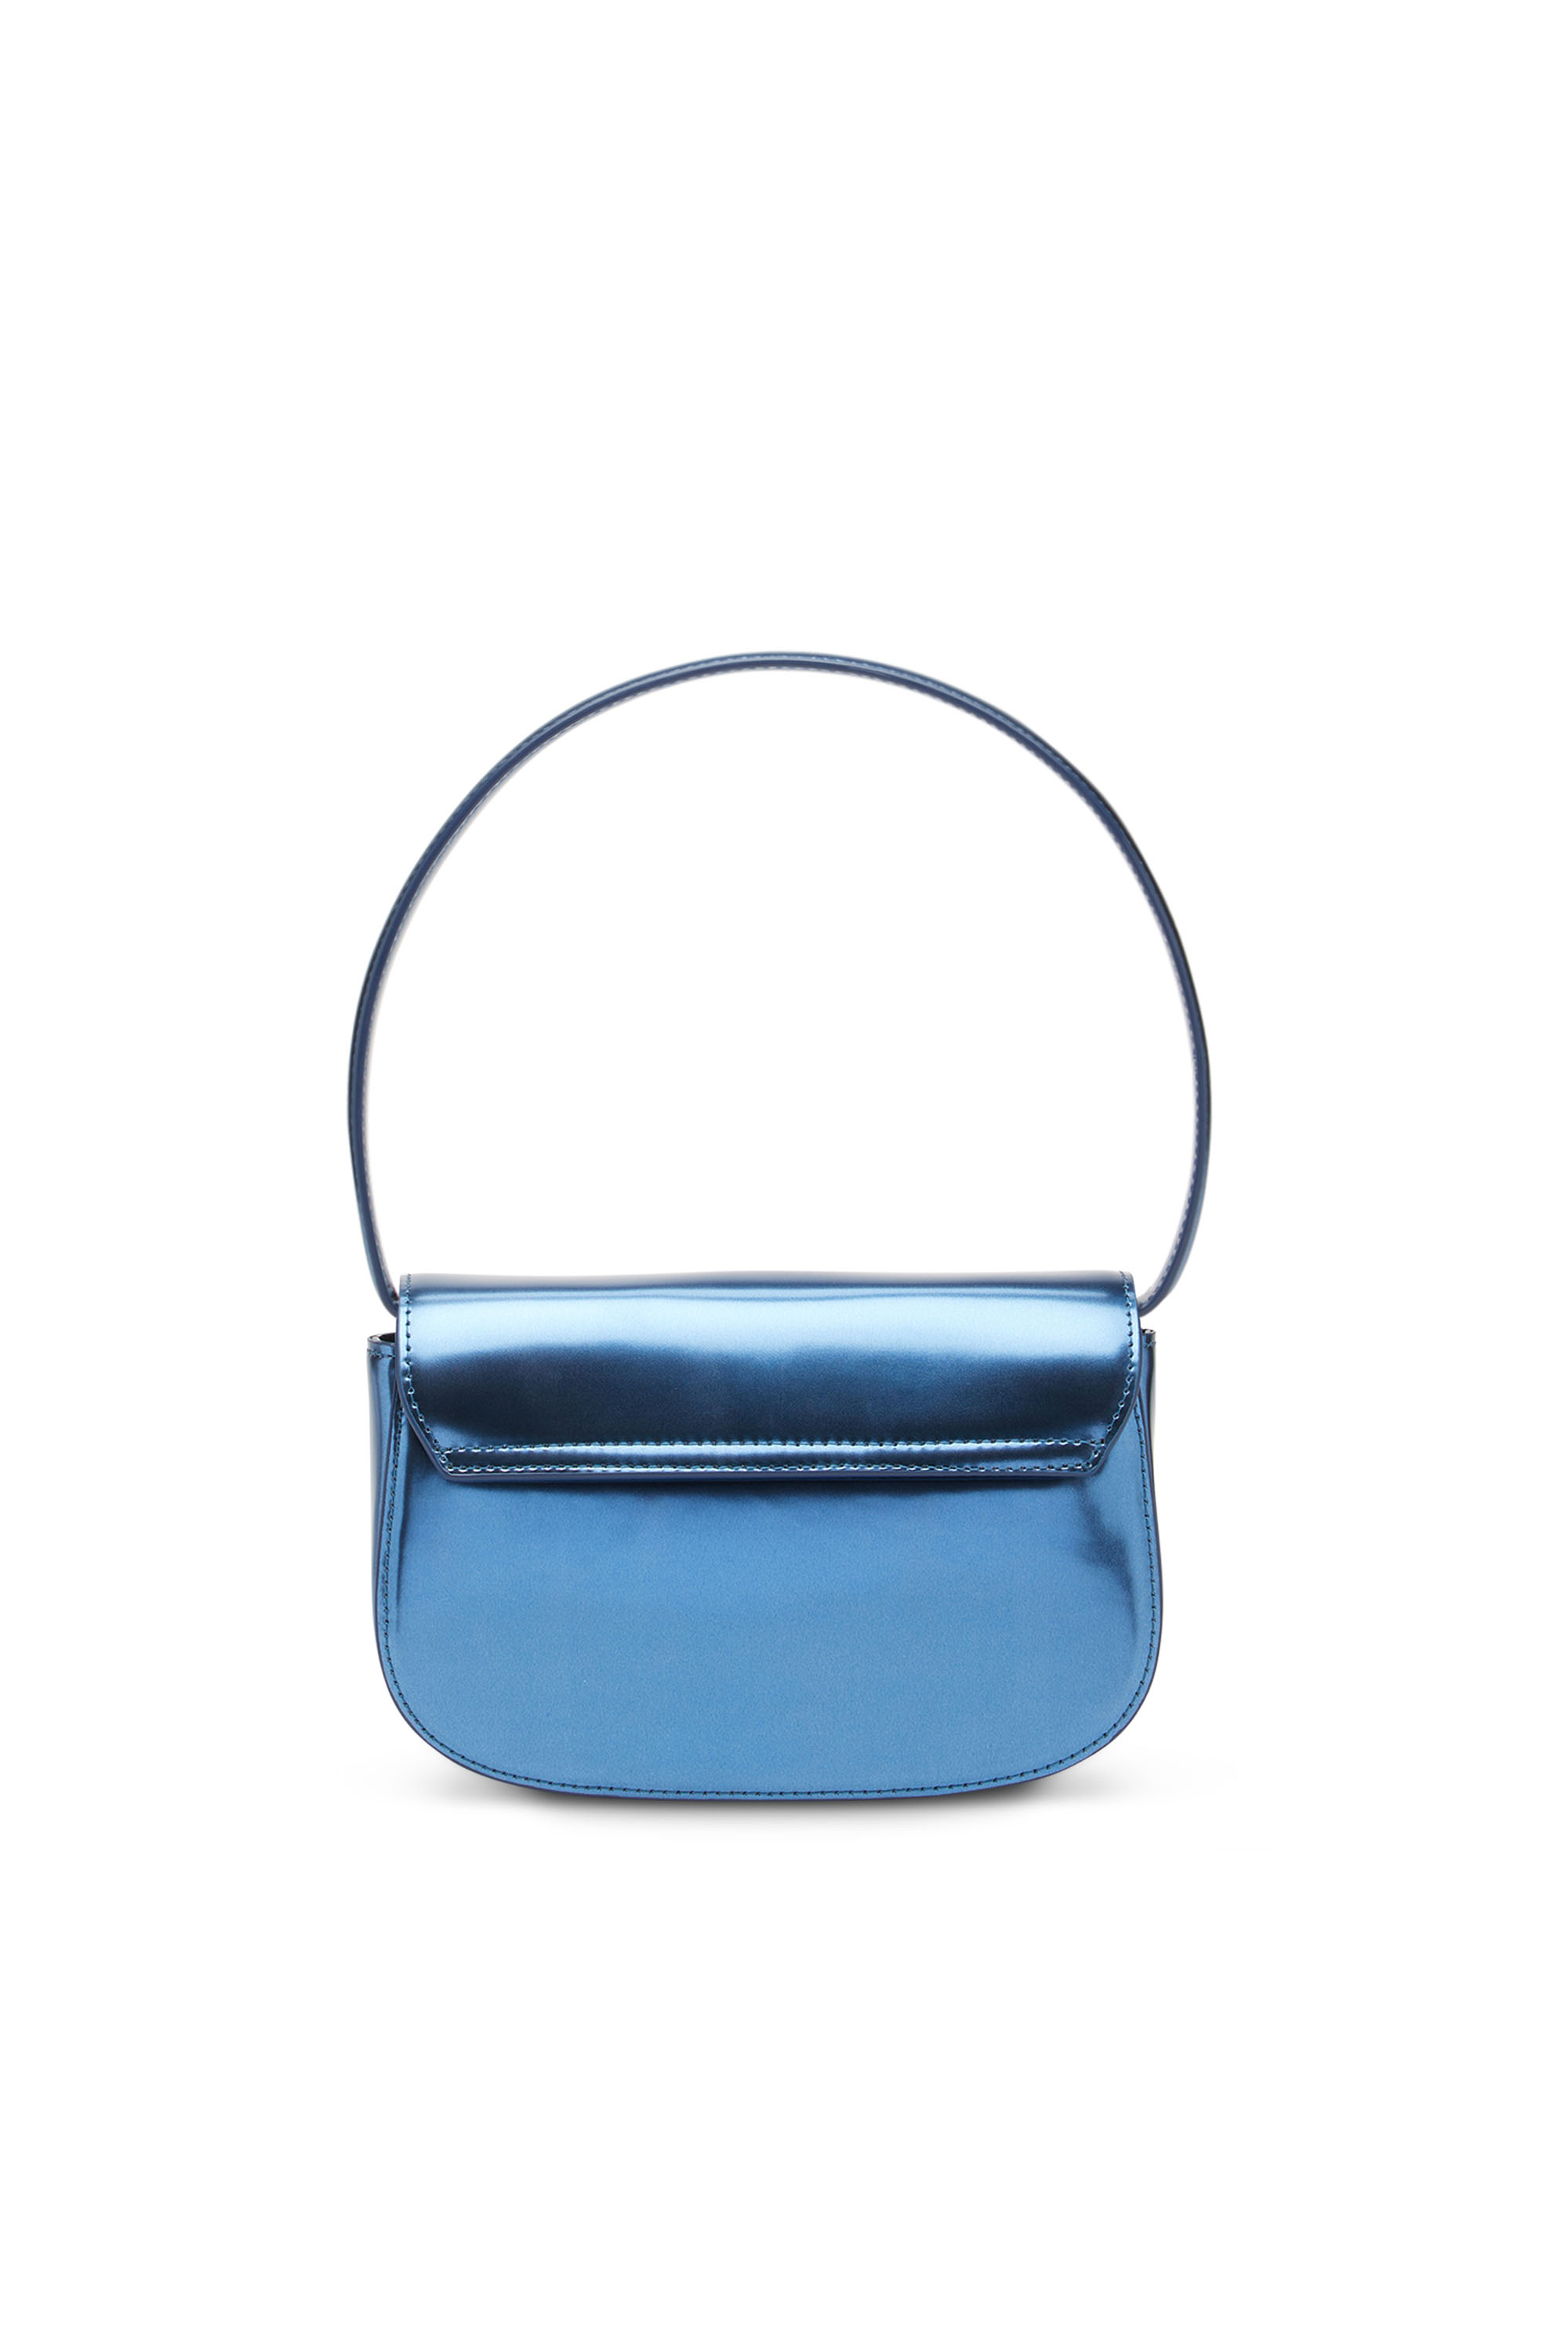 Diesel - 1DR, Woman 1DR-Iconic shoulder bag in mirrored leather in Blue - Image 2